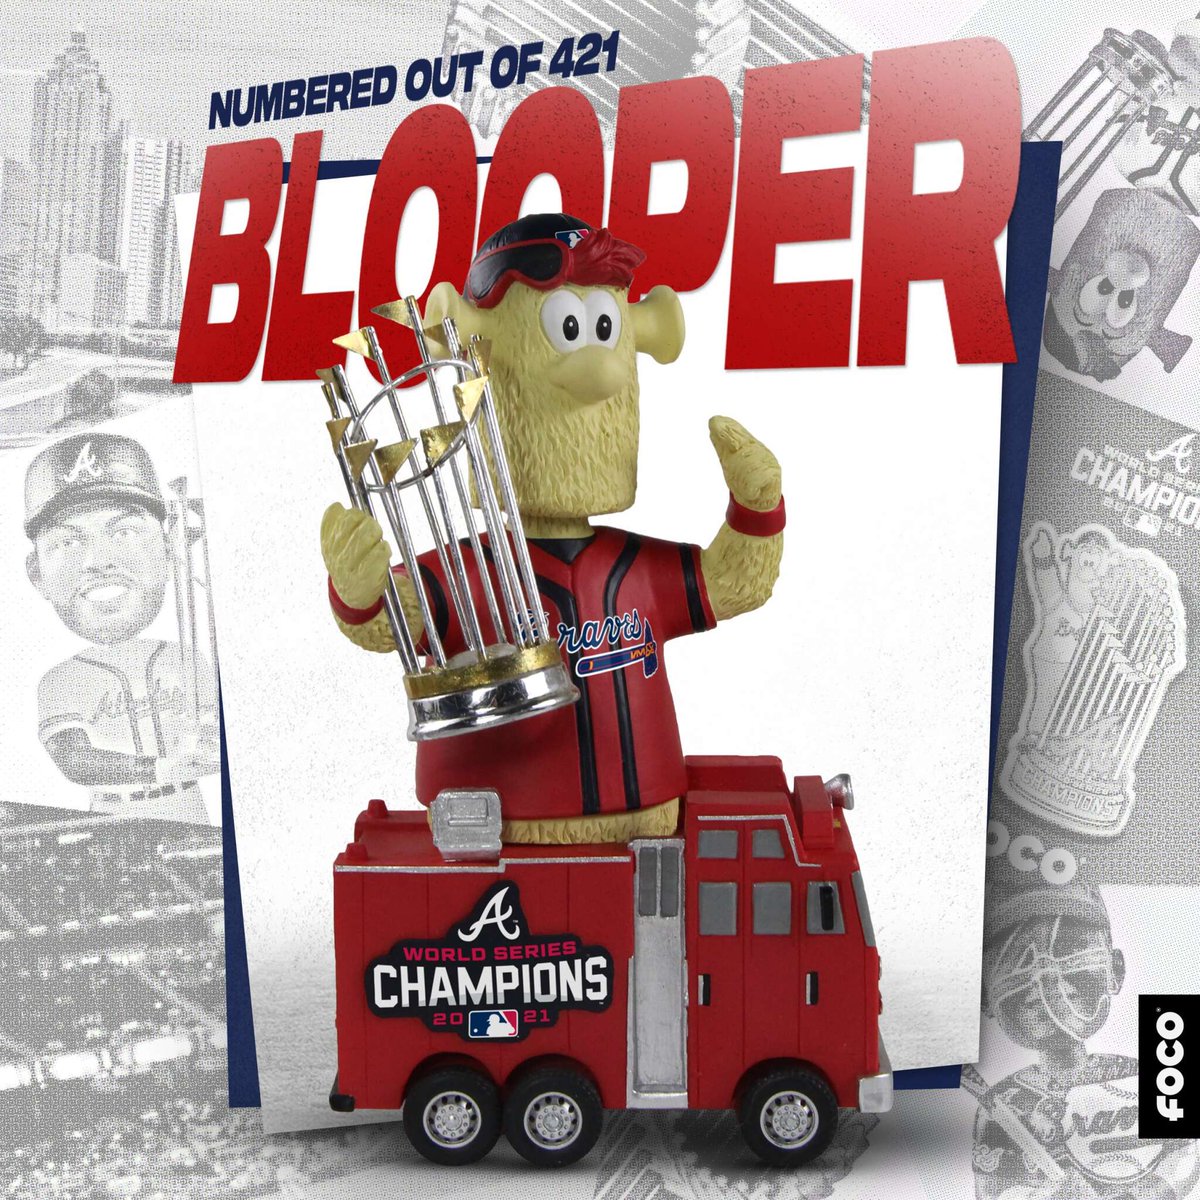 🚨GIVEAWAY!🚨 #Braves fans: I'm partnering again with @FOCOusa to give away this limited edition @BlooperBraves World Series parade bobble head (limited to 421 units). To enter to win, retweet this and follow me, @sn_mlb and @FOCOusa. I'll pick a winner at 1 p.m. ET Friday.